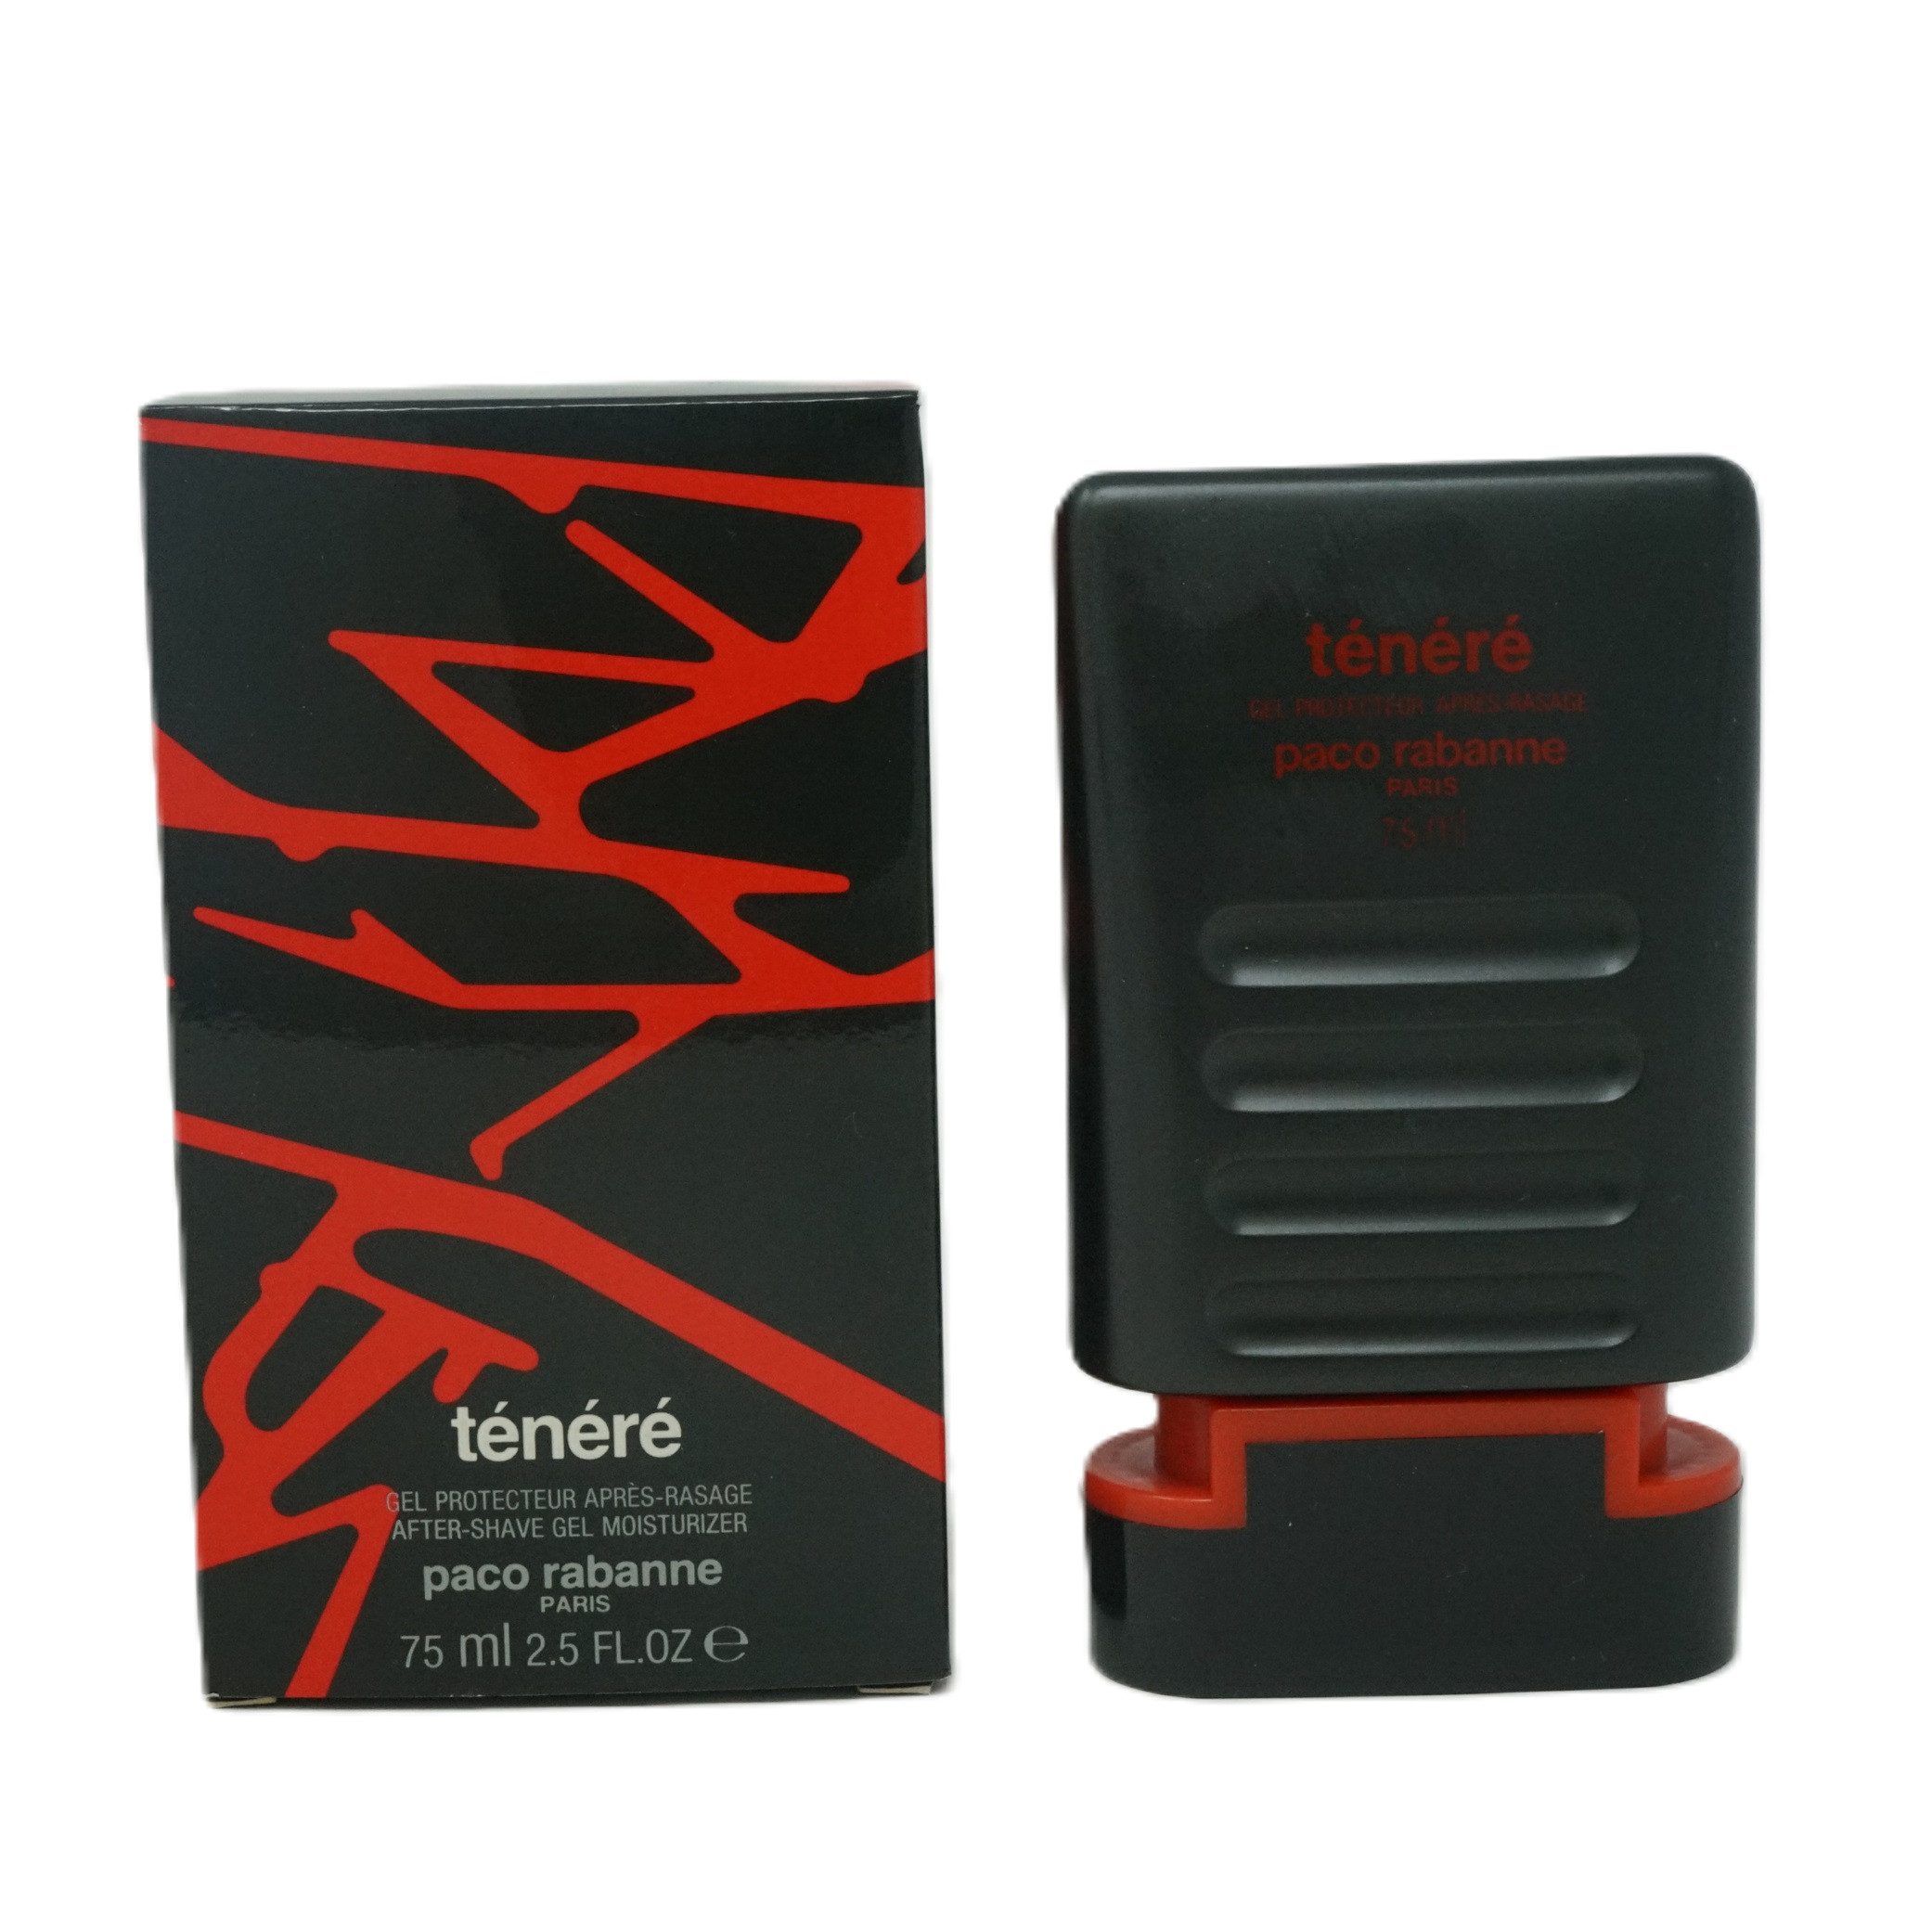 paco rabanne After-Shave Paco Rabanne Tenere After Shave Gel 75ml